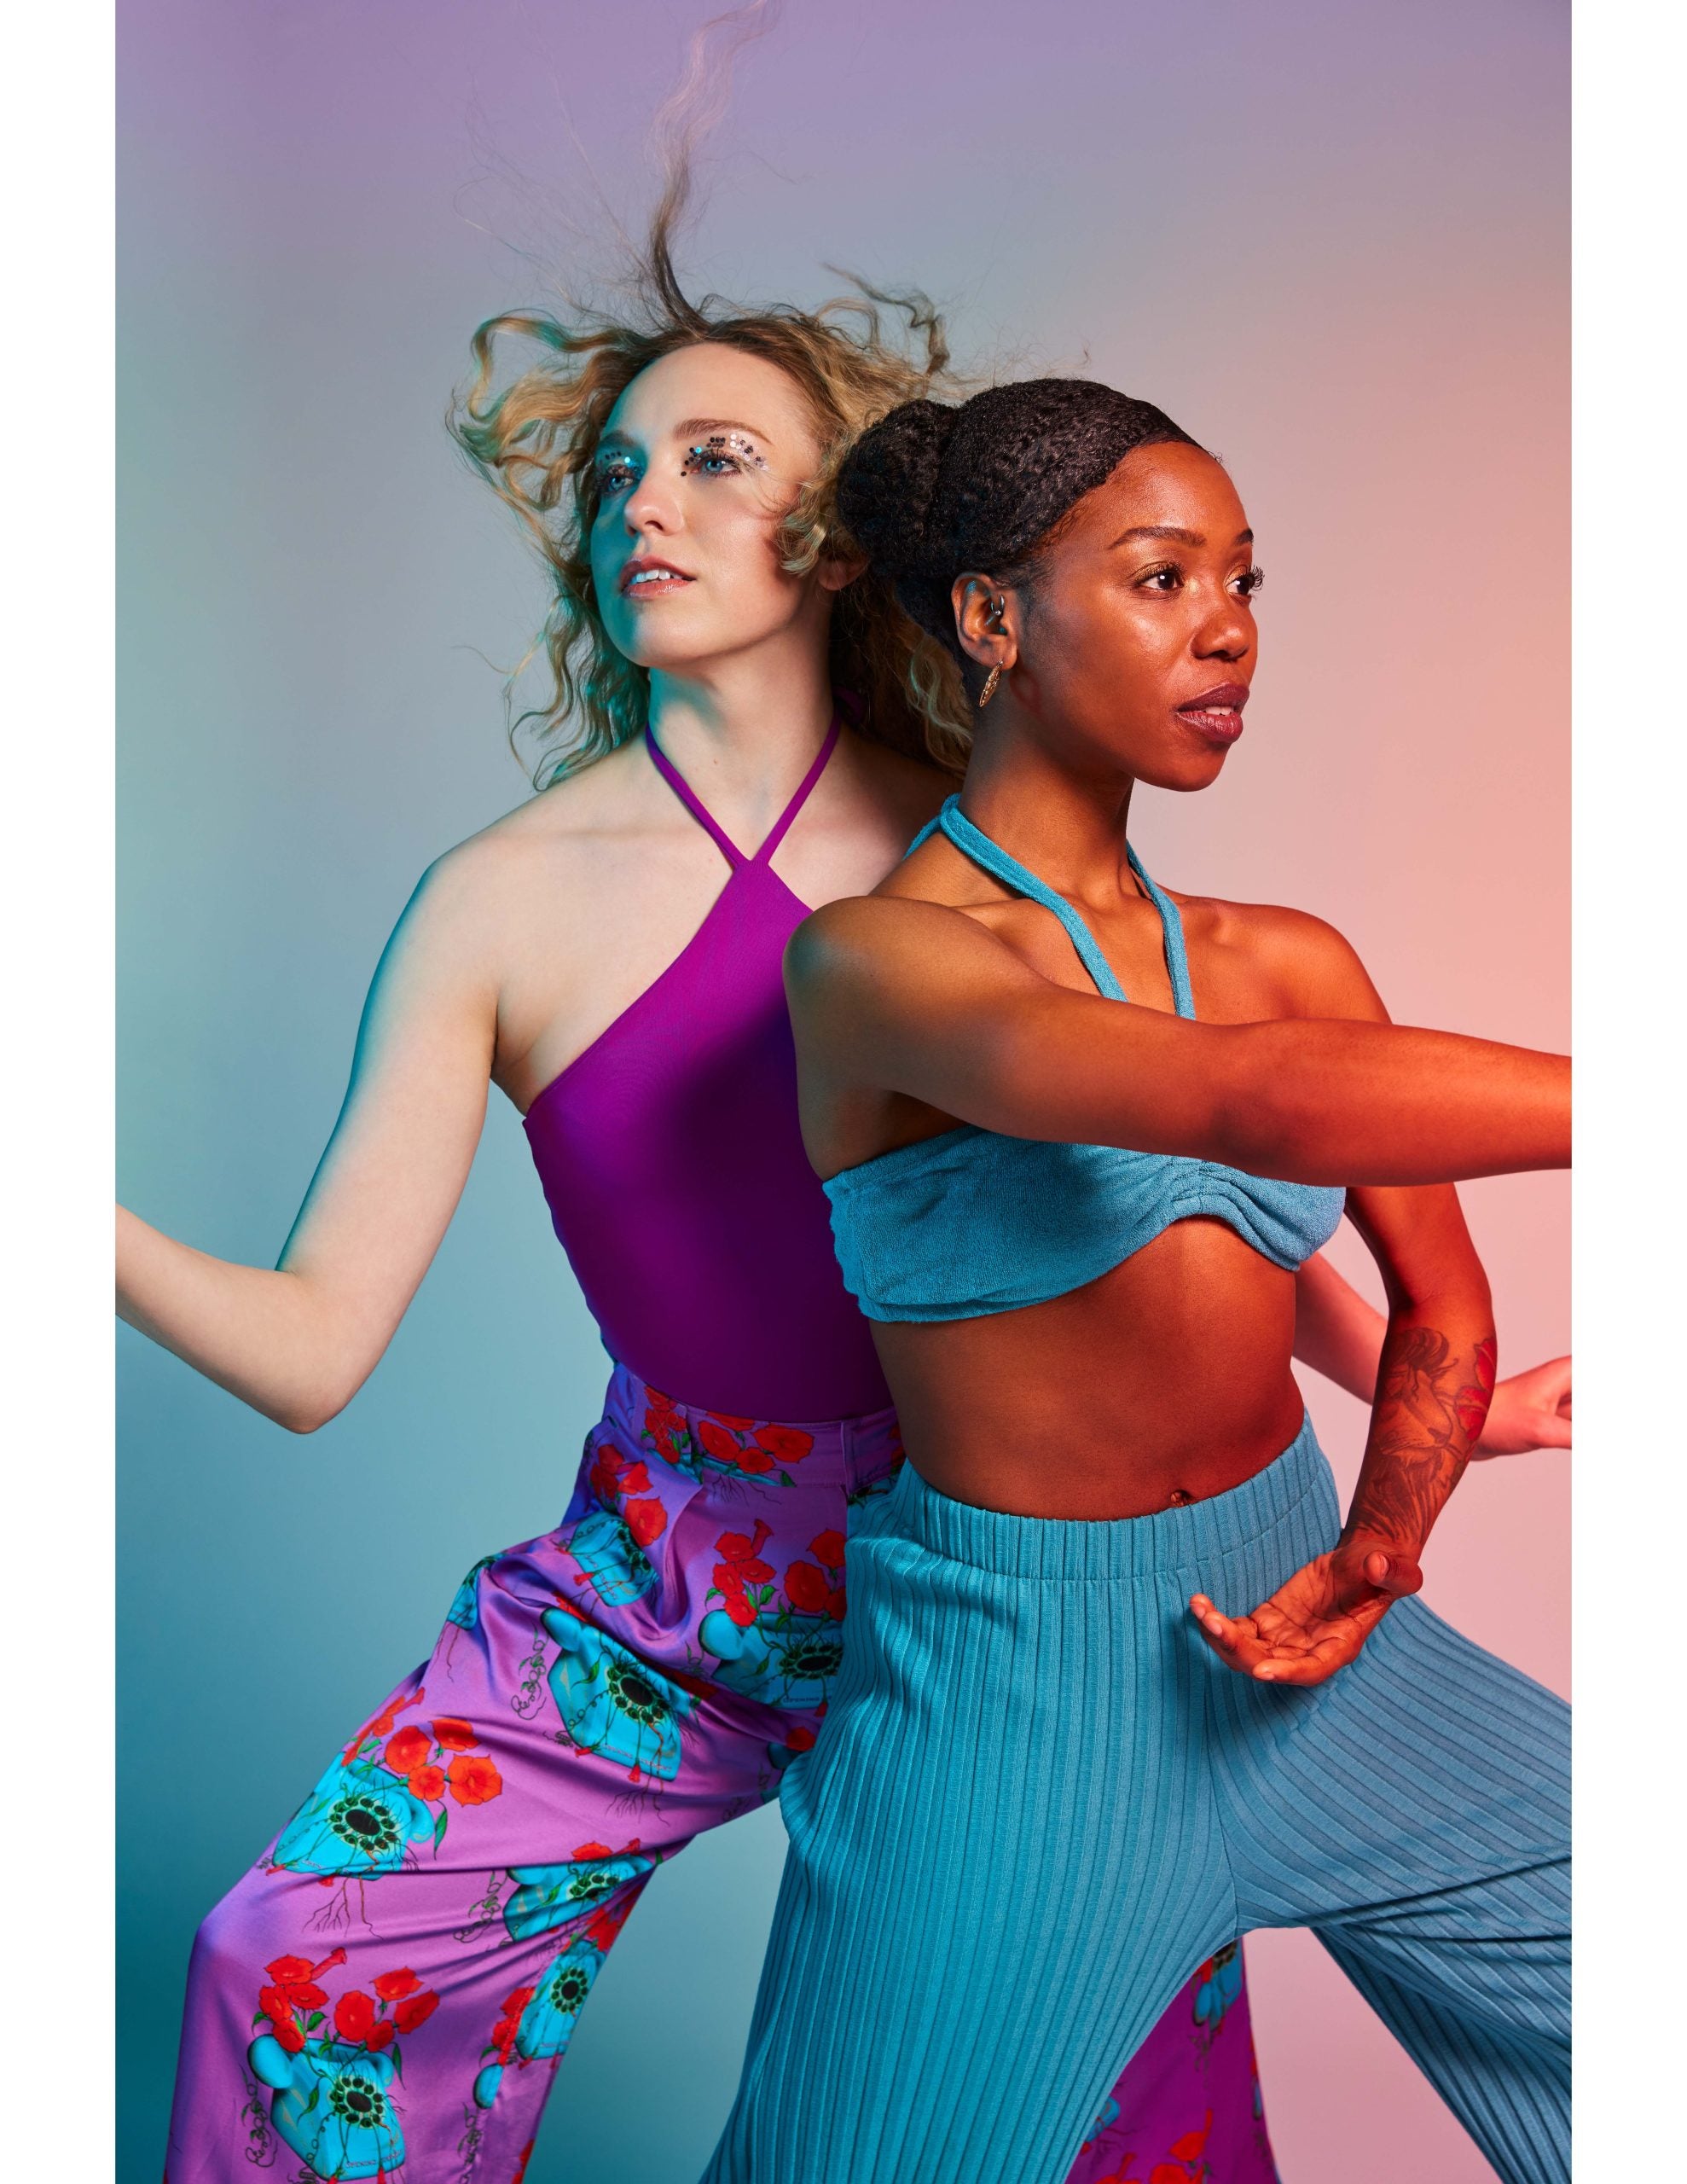 Saks OFF 5TH And The Phluid Project Unveil Capsule Collection For Pride Month